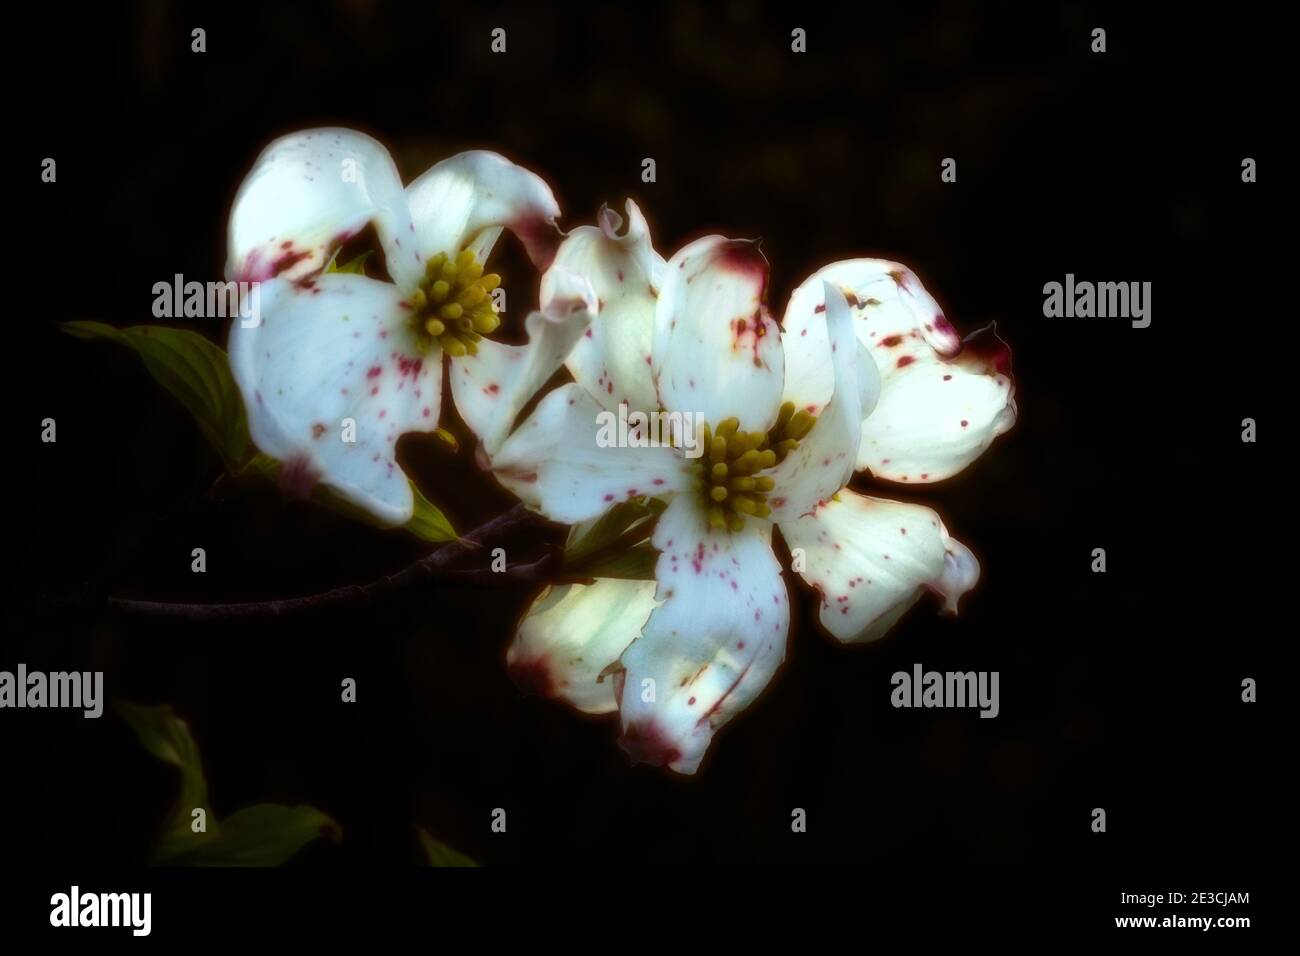 A pair of florida dogwood flowers that are near the end of their bloom cycle.  The background is black and fairly evenly lit. Stock Photo